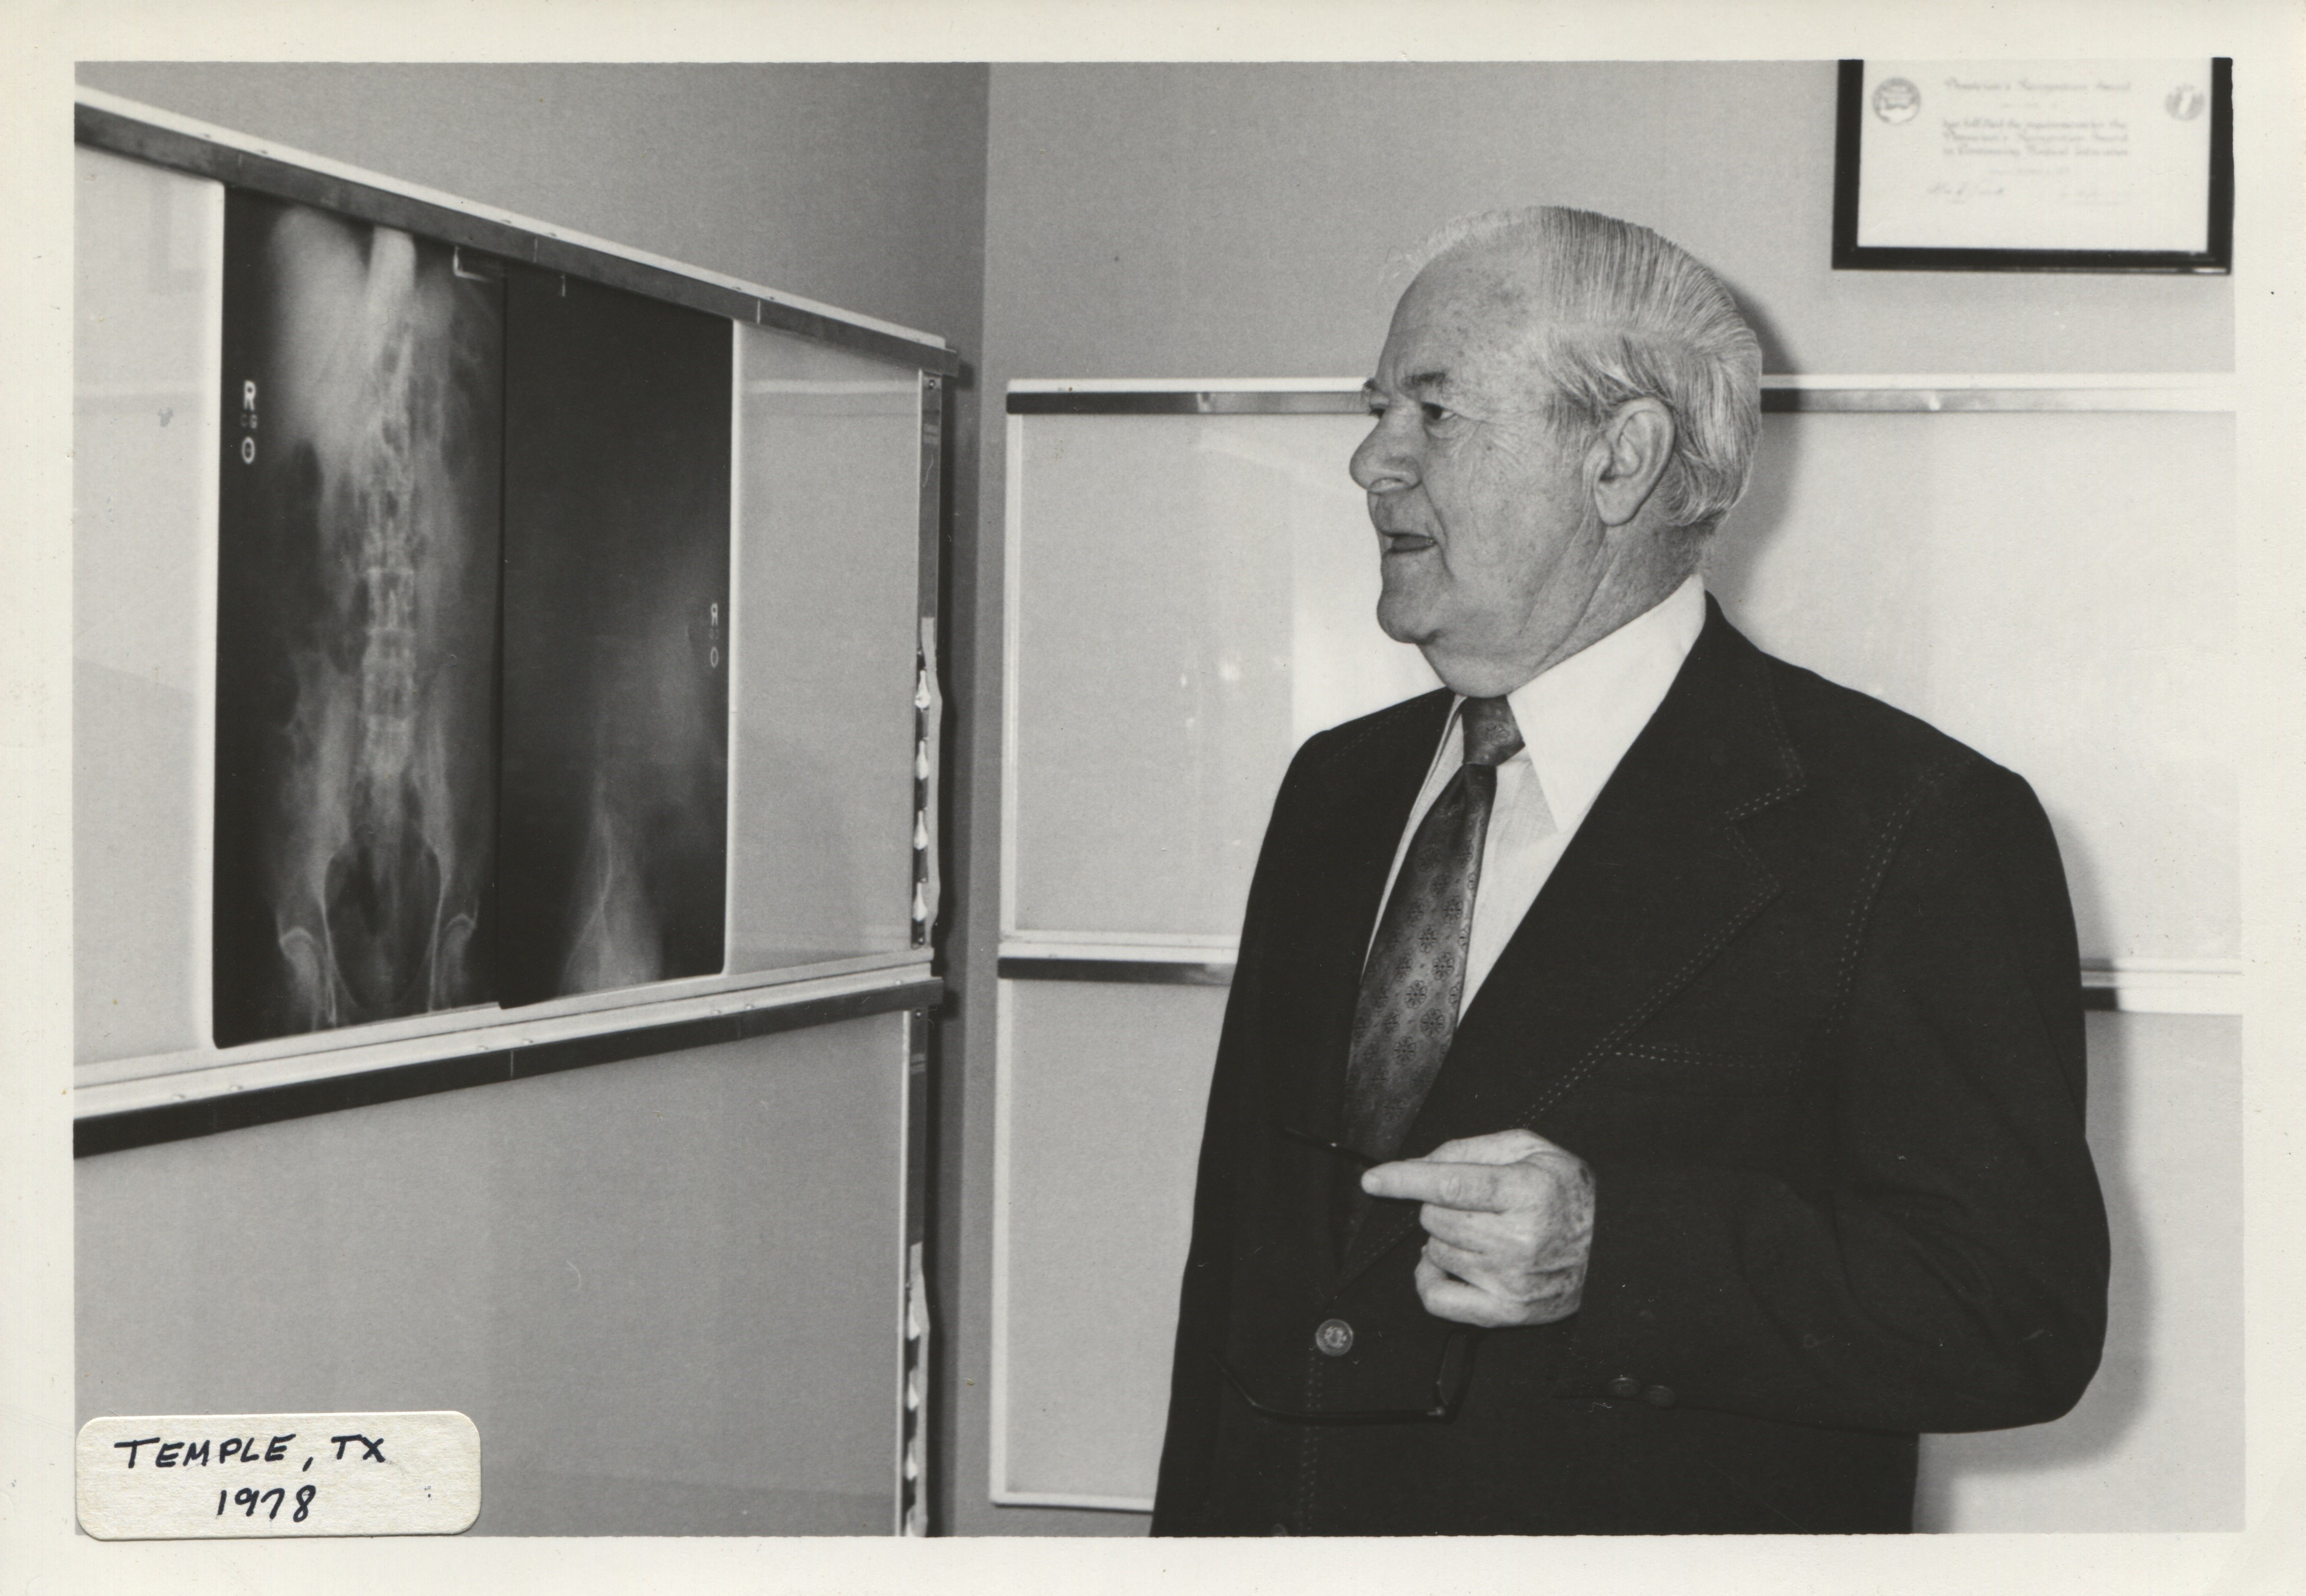 Dr. Felson standing in front of x-ray - 1978